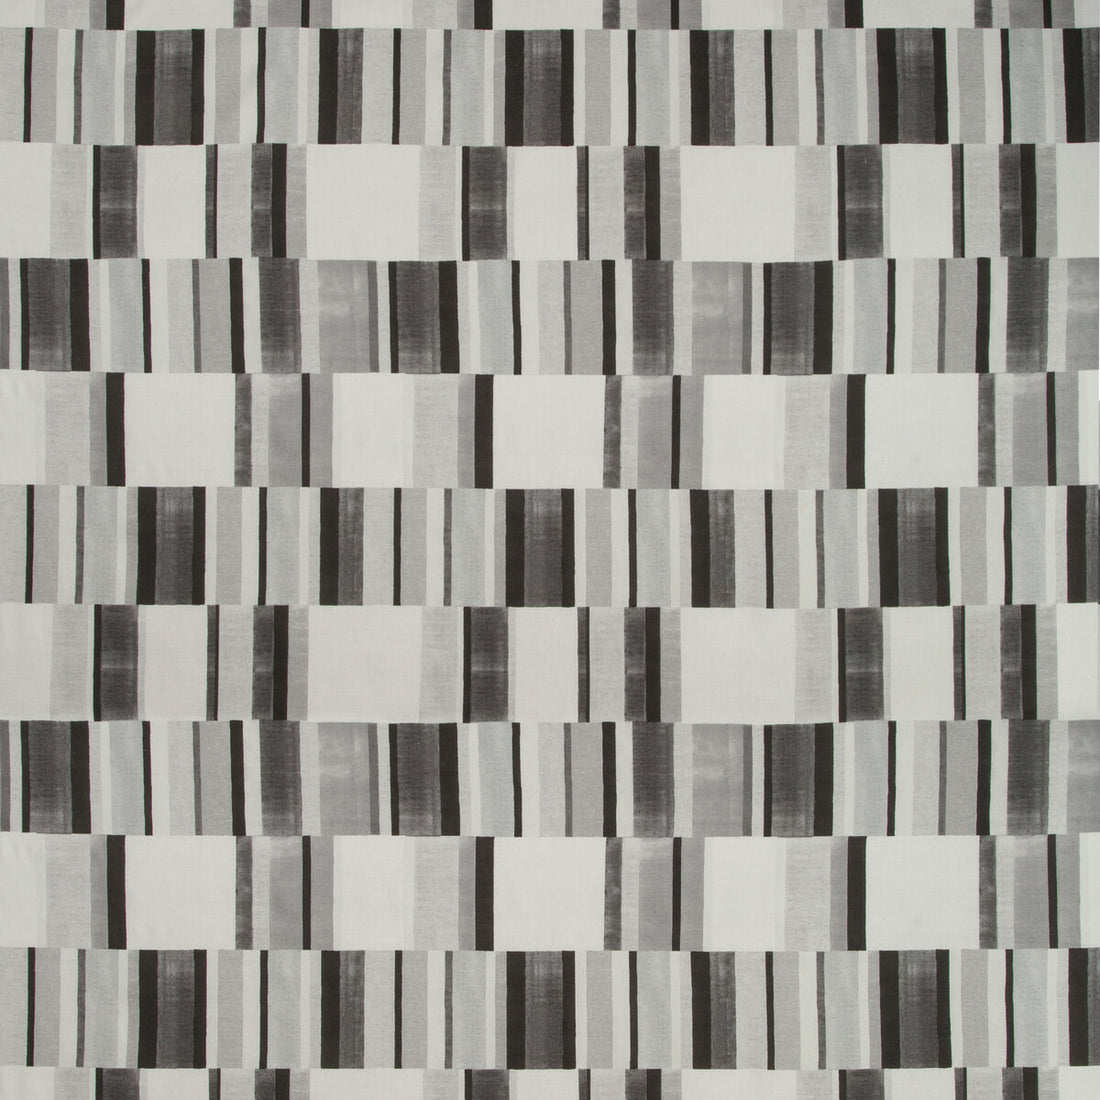 Blockstack fabric in graphite color - pattern BLOCKSTACK.21.0 - by Kravet Basics in the Nate Berkus Well-Traveled collection